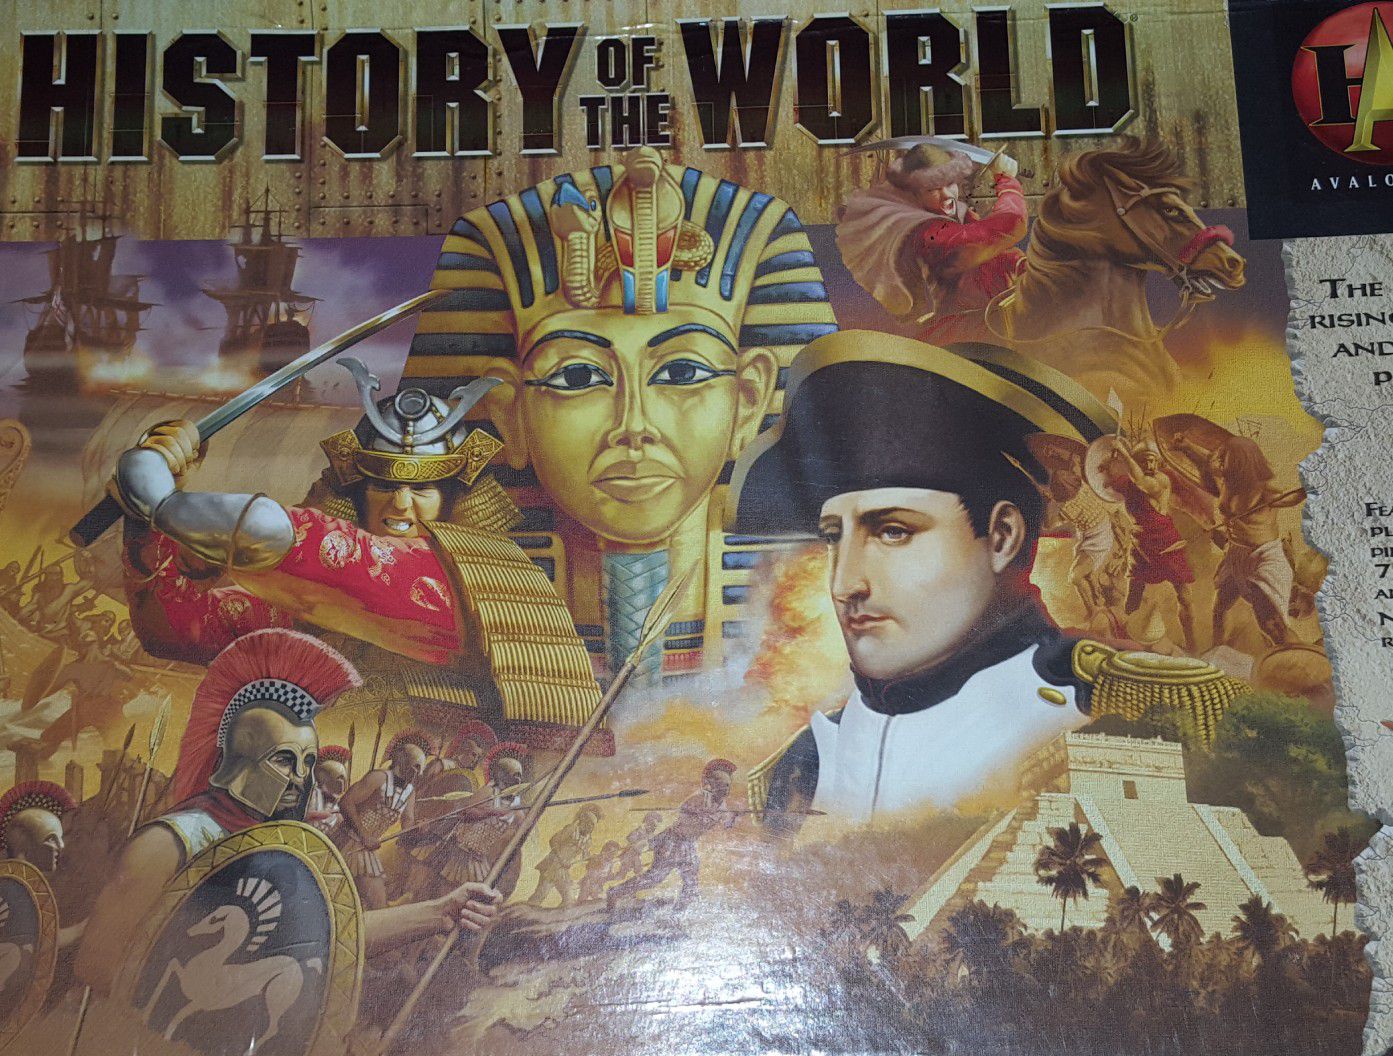 History of the World Board Game